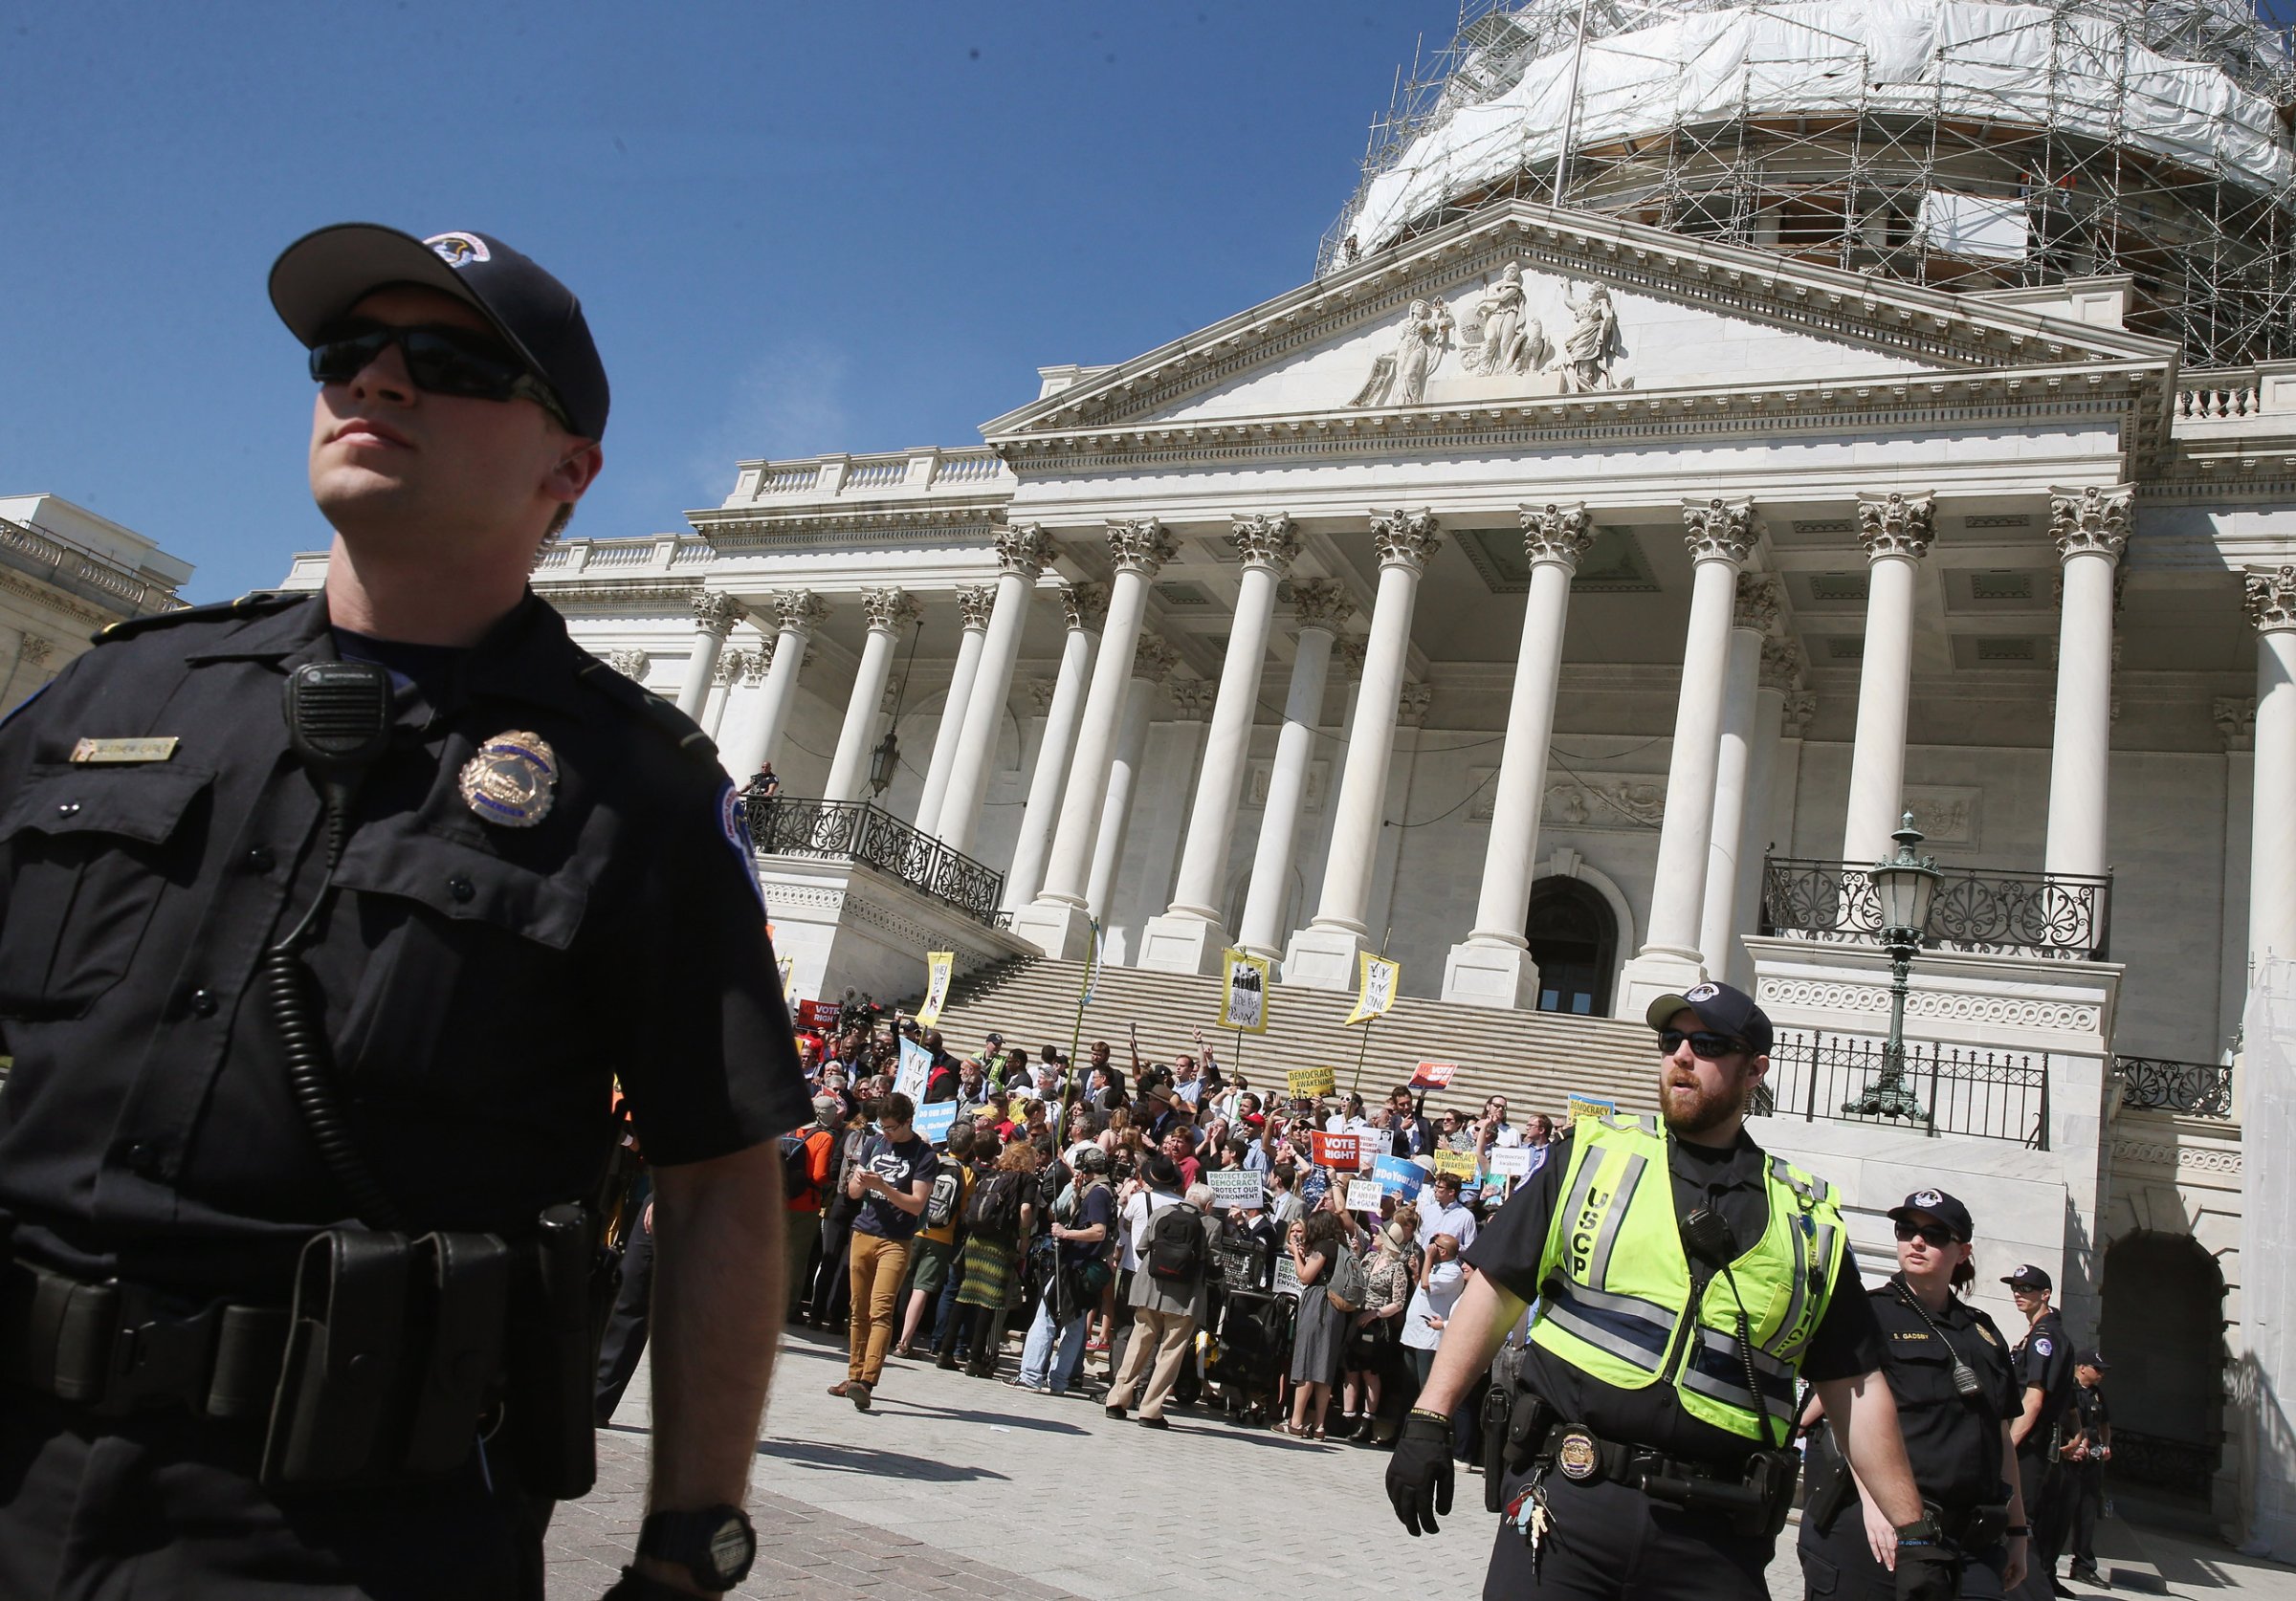 WASHINGTON, DC - APRIL 18: US Capitol Police give protesters a warning to move away from the front of the Capitol or get arrested, April 18, 2016 in Washington, DC. Protest groups Public Citizen and People for the American Way have been protesting the influence of money in politics over the last week, with more than 900 arrests reported. (Photo by Mark Wilson/Getty Images)